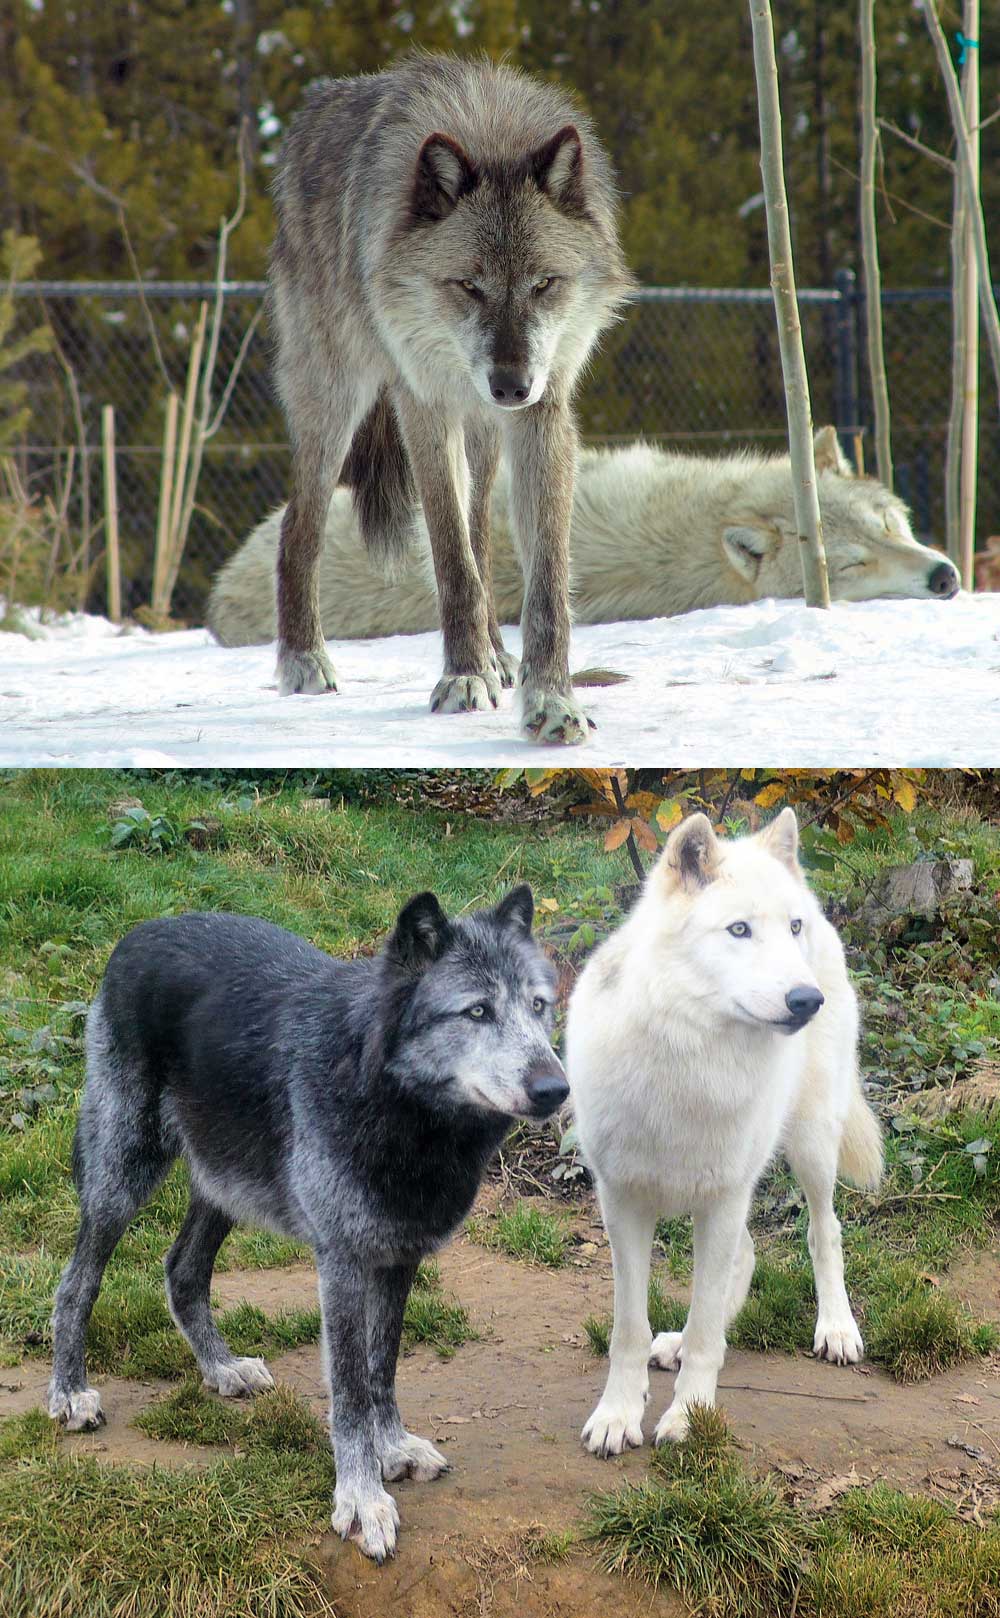 Fact: The gray wolf is the most common wolf in Europe, Asia and North America